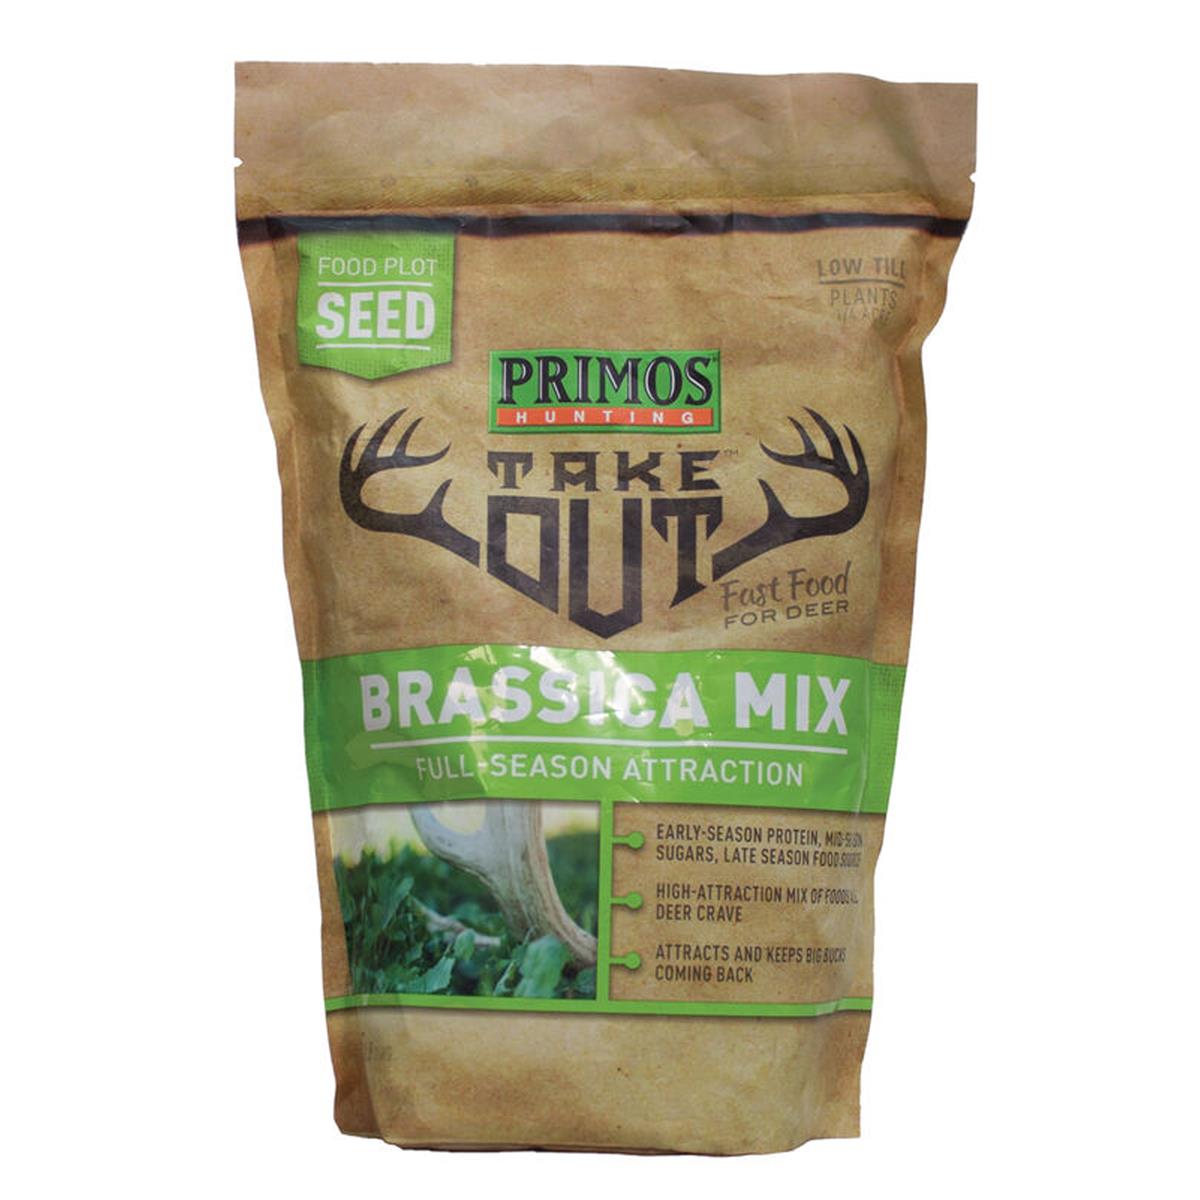 Image of Bushnell Take Out Brassica Mix Food Plot Seed